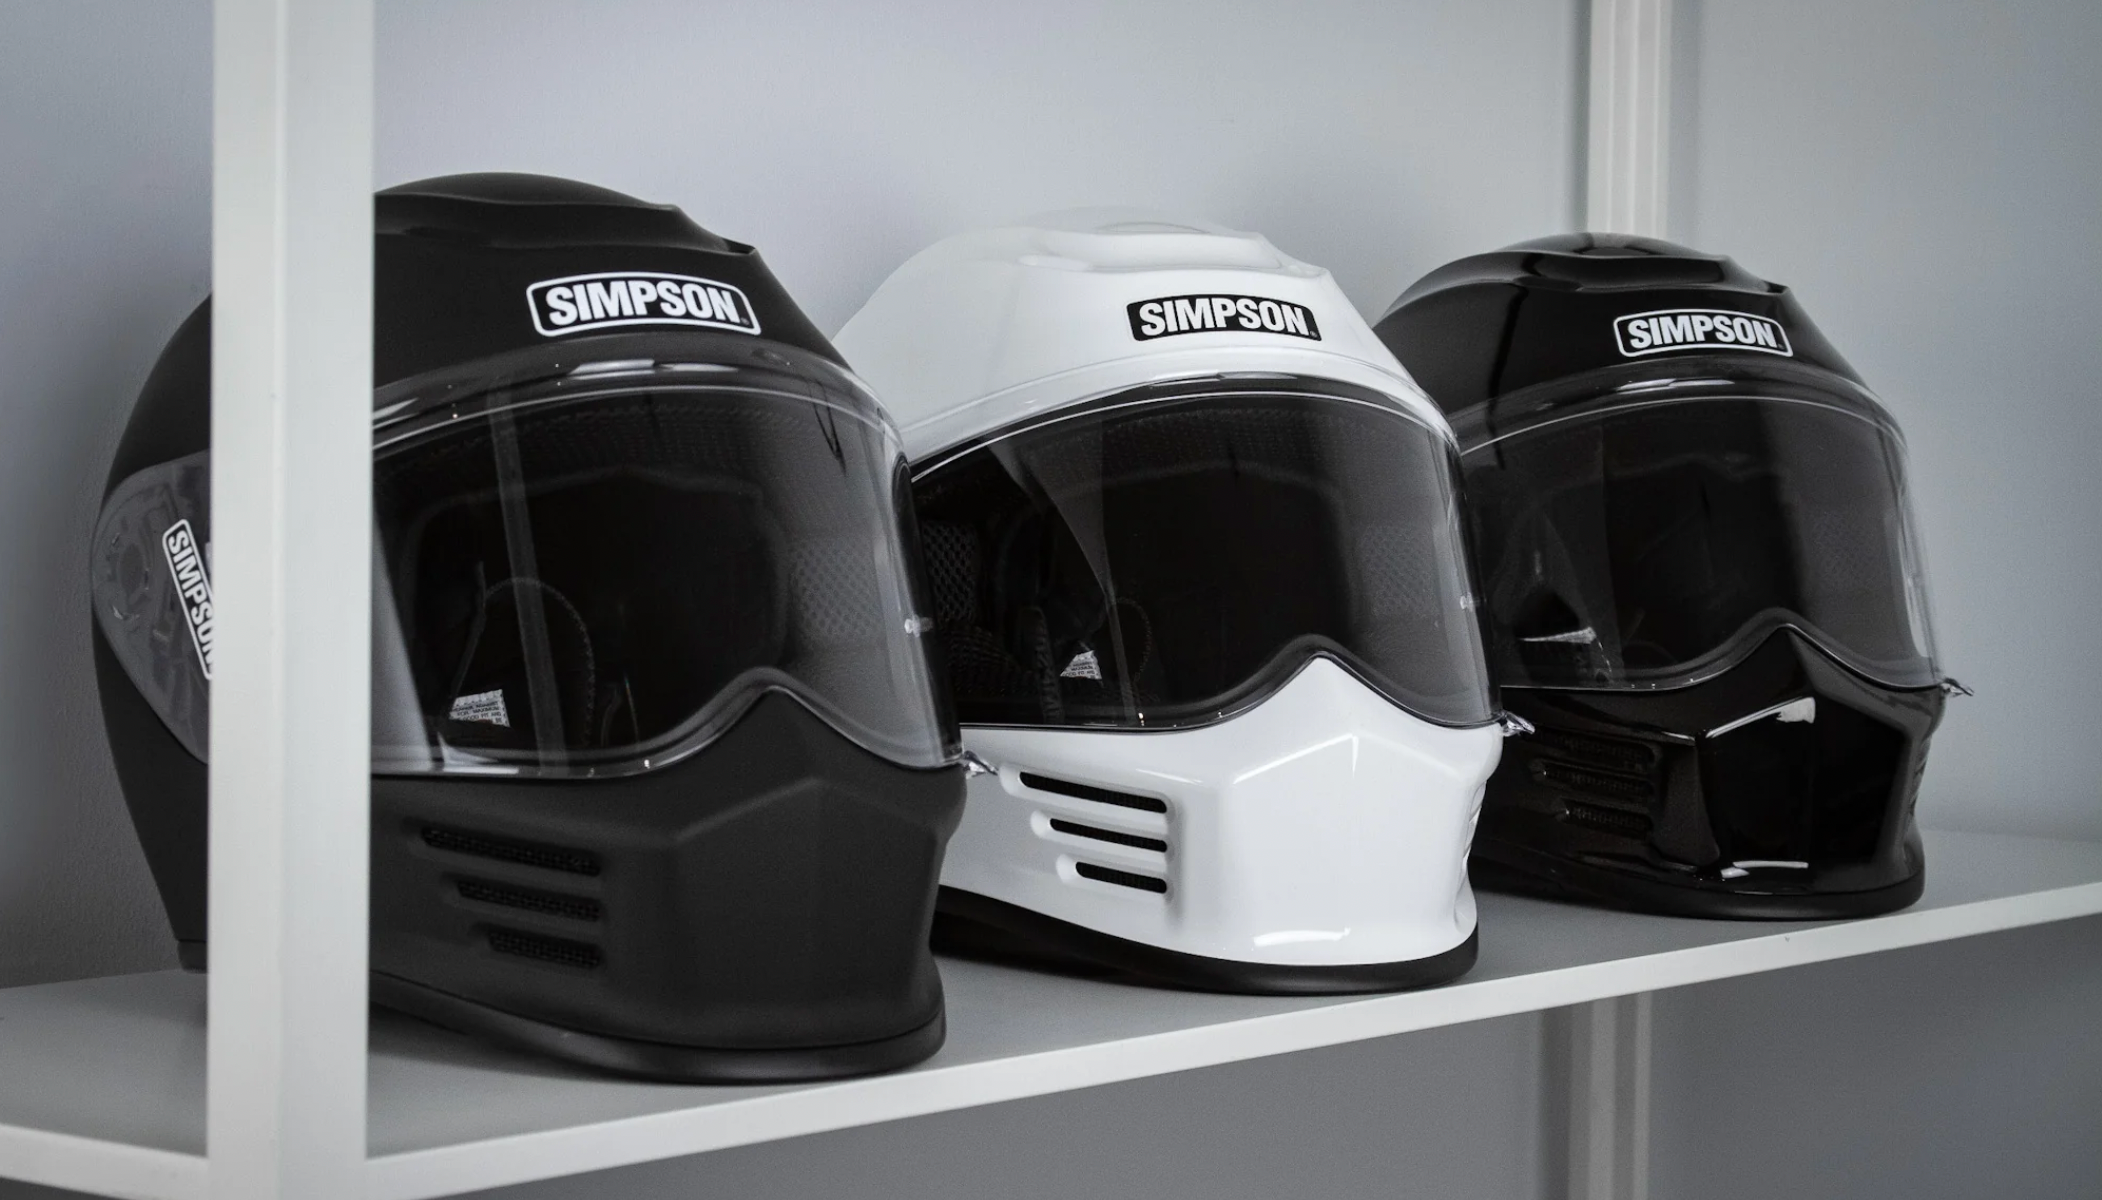 Buy Simpson Motorcycle Helmets and Shields Online in Canada